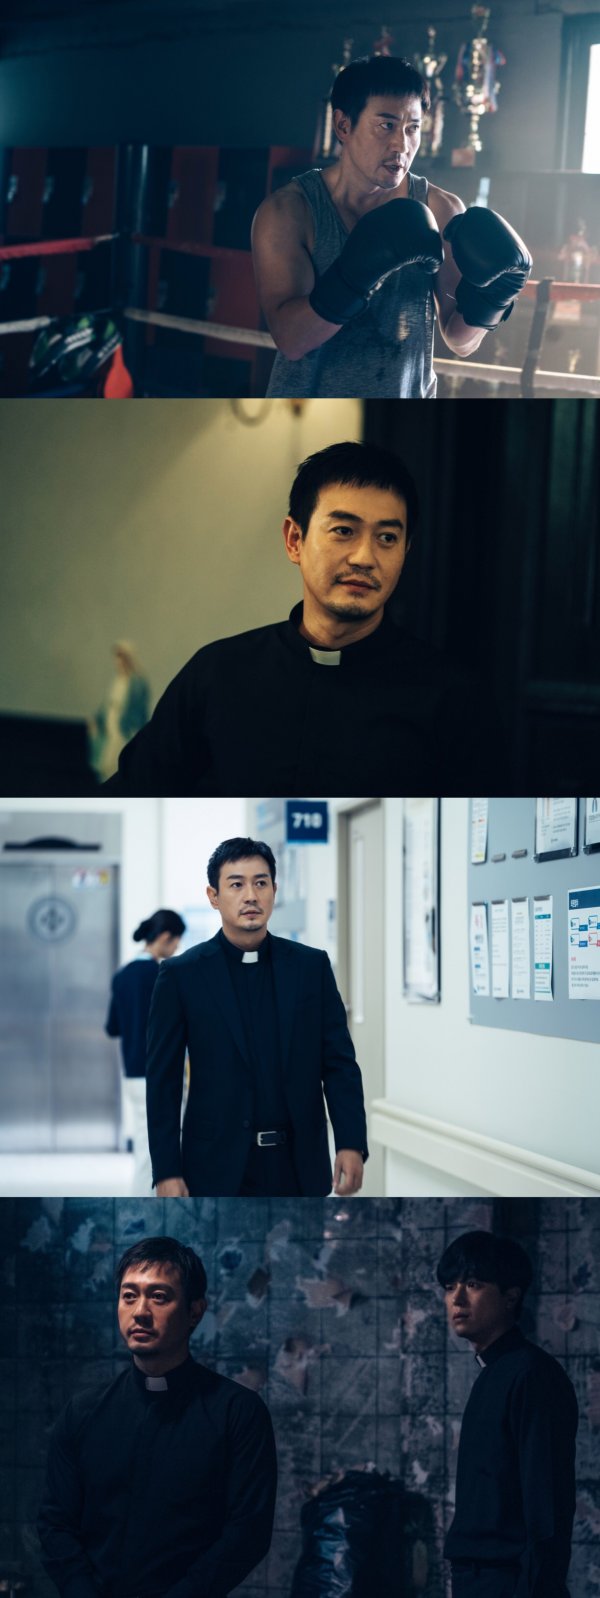 Park Yong-woo plays the role of Father James Kyson, an EXO-sist who is trying to protect everyone in the drama, and appears as a leader of the 634 Regia, a Kuma group, with a cool but strong side.Park Yong-woo has focused attention on the new Bride character, which breaks the existing framework, while taking the center of the drama with a heavy presence from its first appearance.In the second episode of Priest (playplayplay by Moon Man-se, director Kim Jong-hyun, and production by Craveworks), which aired on the 25th, James Kyson led a Kuma ceremony to save his son, elementary school student universe (Park Min-soo), and showed a leader full of Charisma.As soon as the parish offices permission fell, James Kyson met with the mother of the universe and explained the necessity of the Kuma ceremony and got consent.After entering a full-scale Kuma ceremony, James Kyson confronted the evil spirits in the body of the universe and tensely confronted the tension.James Kyson led Sumin with a veteran EXOsist-down quick judgment and fought back, hard-line blocking the cosmic, wildly rejecting universe.Since then, the first aid of Eun-ho (Jeong Yu-mi) has ended the universes Kuma, but James Kyson has shown a keen feeling that the evil spirit will soon reappear.Park Yong-woo expressed delicately from anger toward evil spirits to the sadness of losing his fellow mental department (played by forward) and showed a strong aspect in action with agile and powerful movement.Based on stable acting, we have completely digested the scenes of Kuma, which was a series of urgent situations, including numerous Latin ambassadors.In particular, Park Yong-woo is a different priest character with a combination of strength and joy, capturing the attention of viewers.In the first broadcast, it shows strength with a solid body and high-quality boxing ability, and it is adding vitality to the drama with a priest chemistry like a Kuma combo, Yeon Woo-jin.As James Kyson, the leader of 634 Regia, is leading the battle against evil spirits, there is a growing expectation of how Park Yong-woo will lead Drama in the future.On the other hand, OCN TOIL original drama Priest is broadcast every Saturday and Sunday at 10:20 pm.